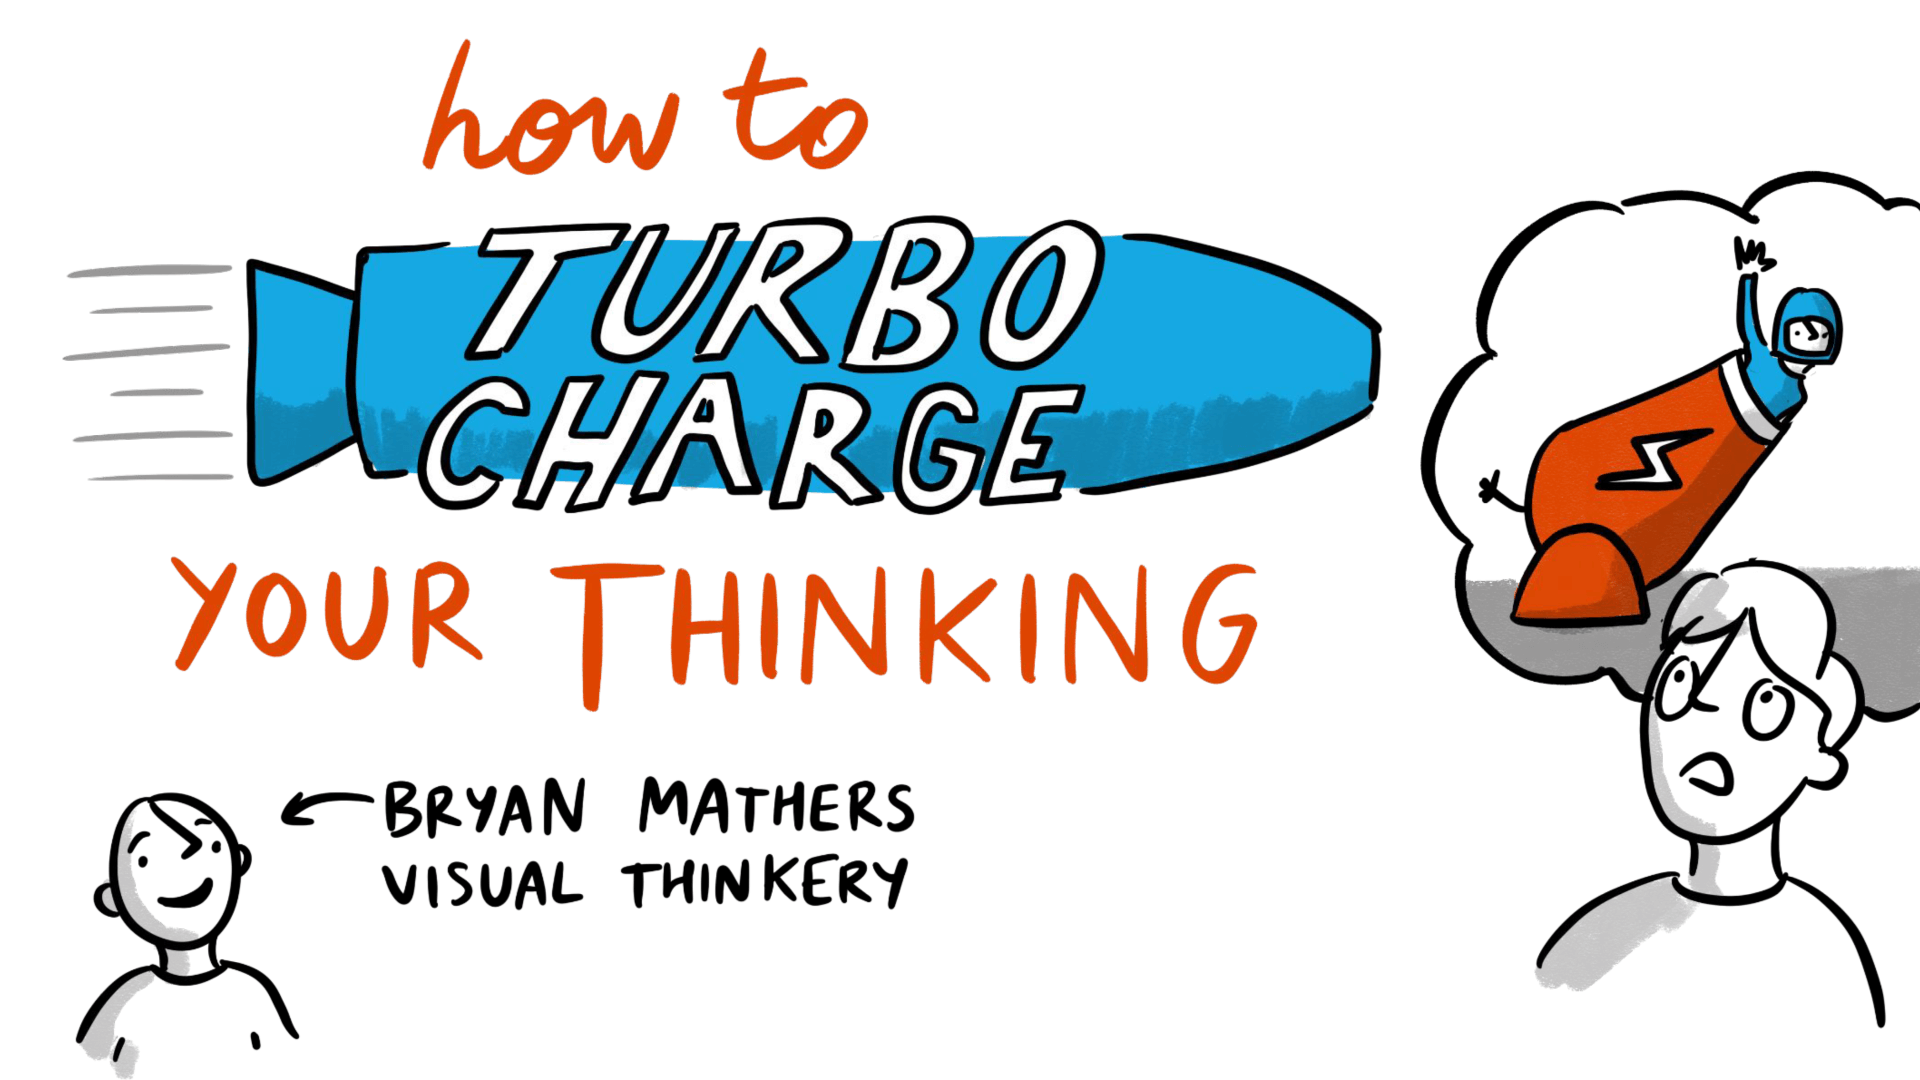 How to turbo-charge your thinking